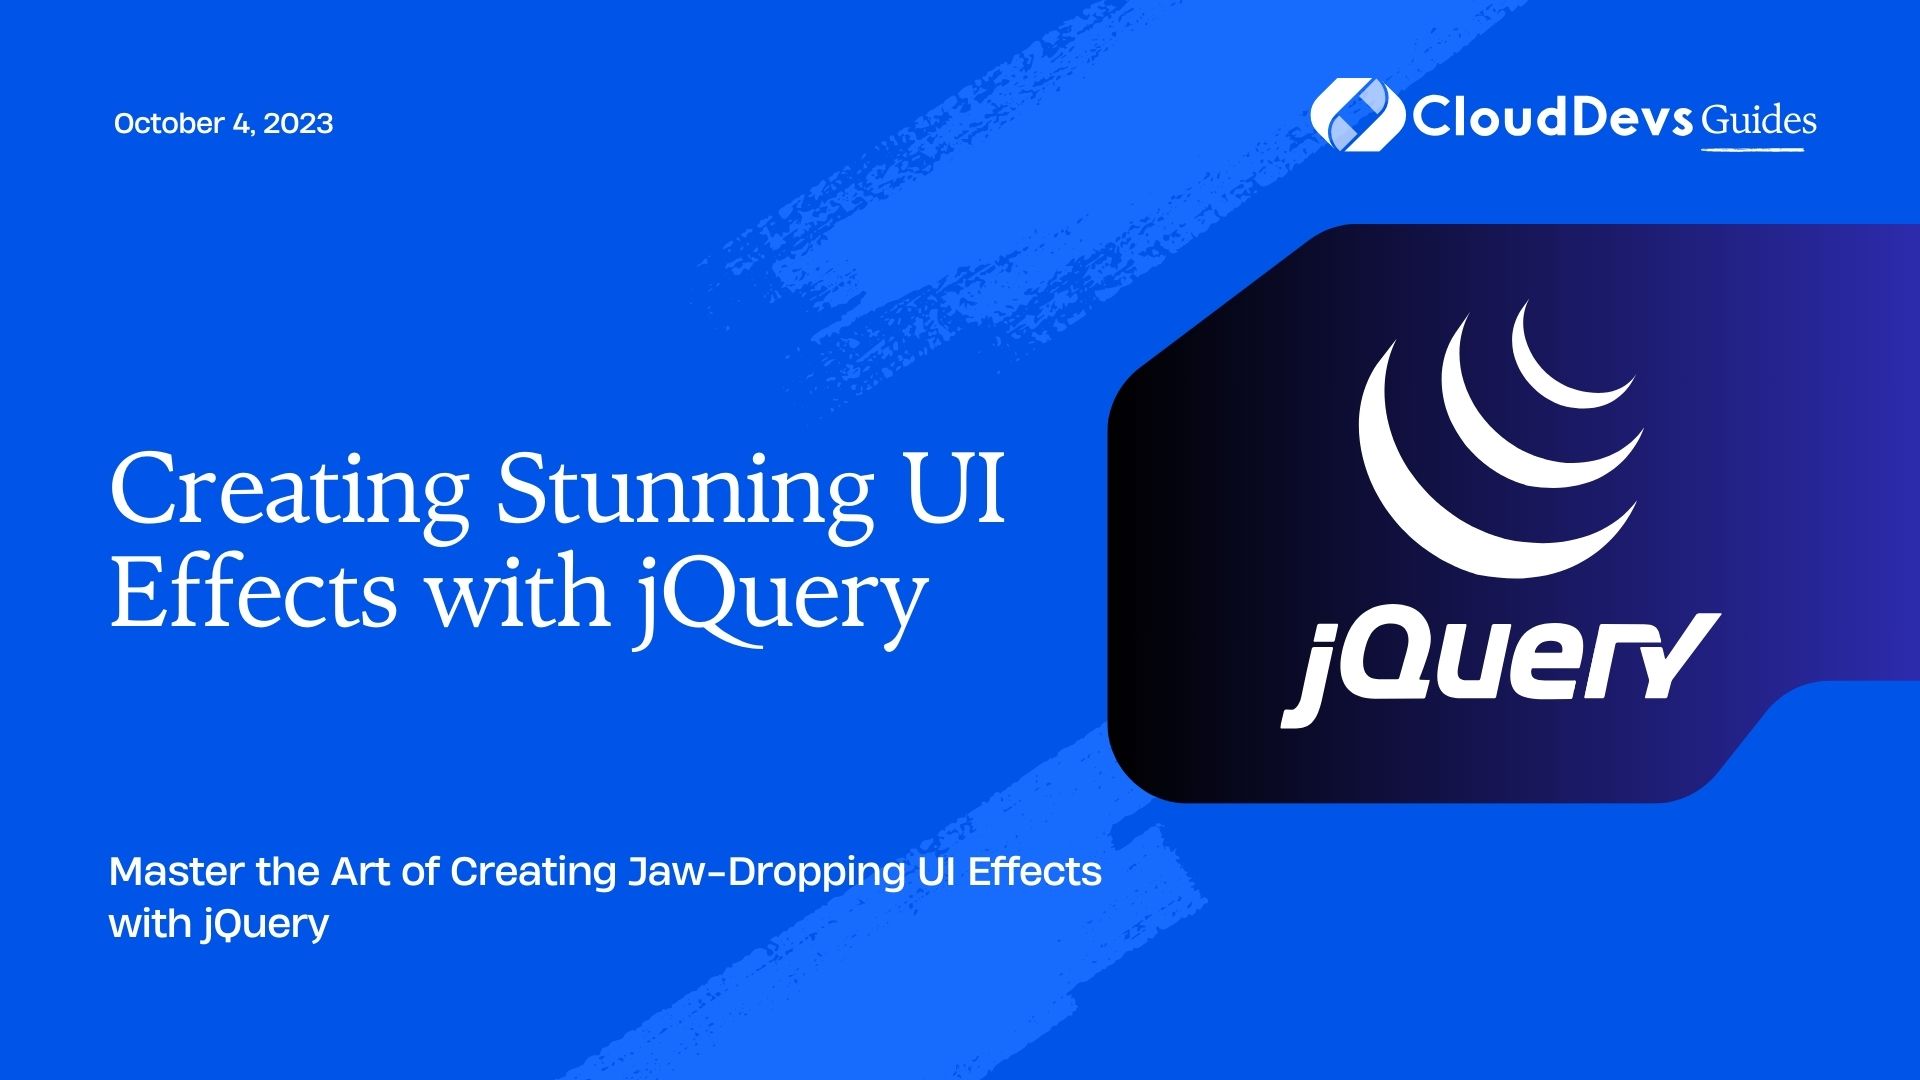 Creating Stunning UI Effects with jQuery